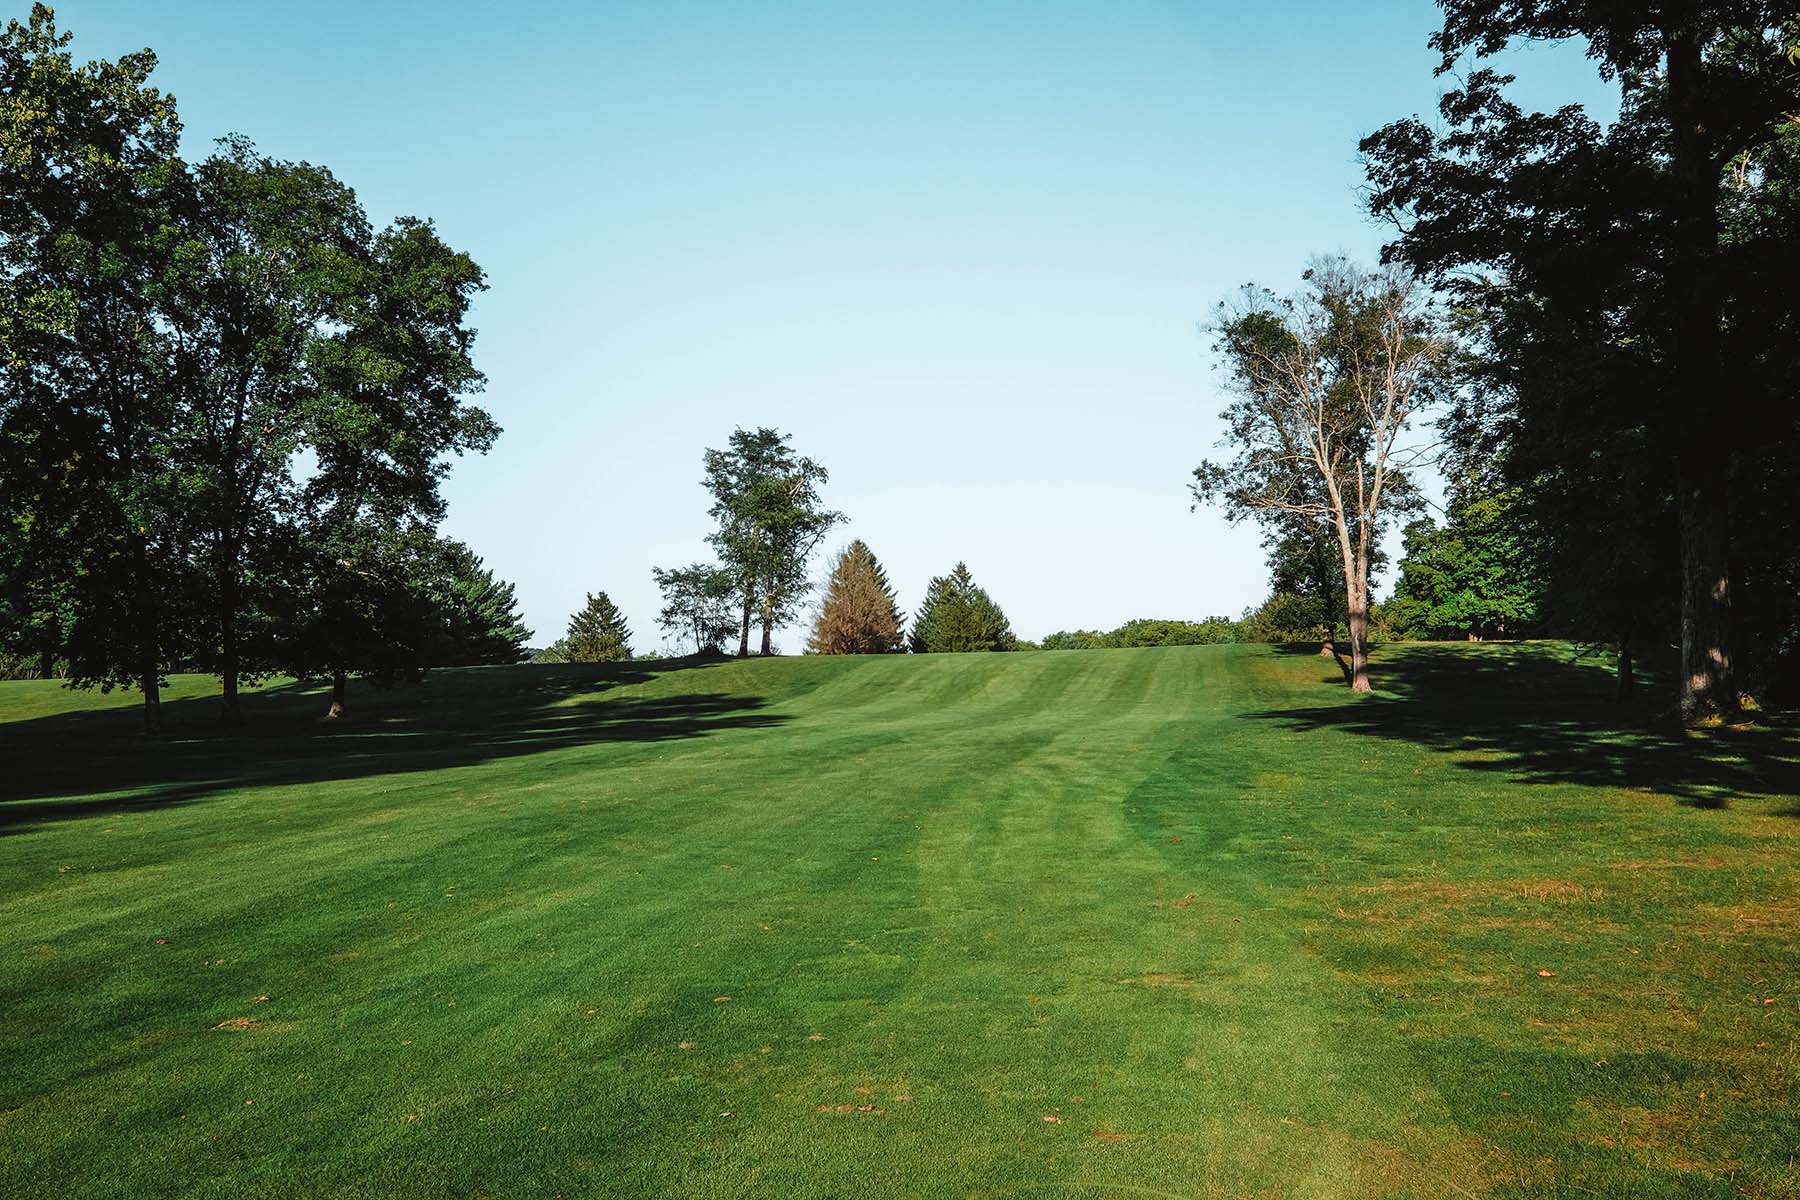 view of golf course green with trees in foreground